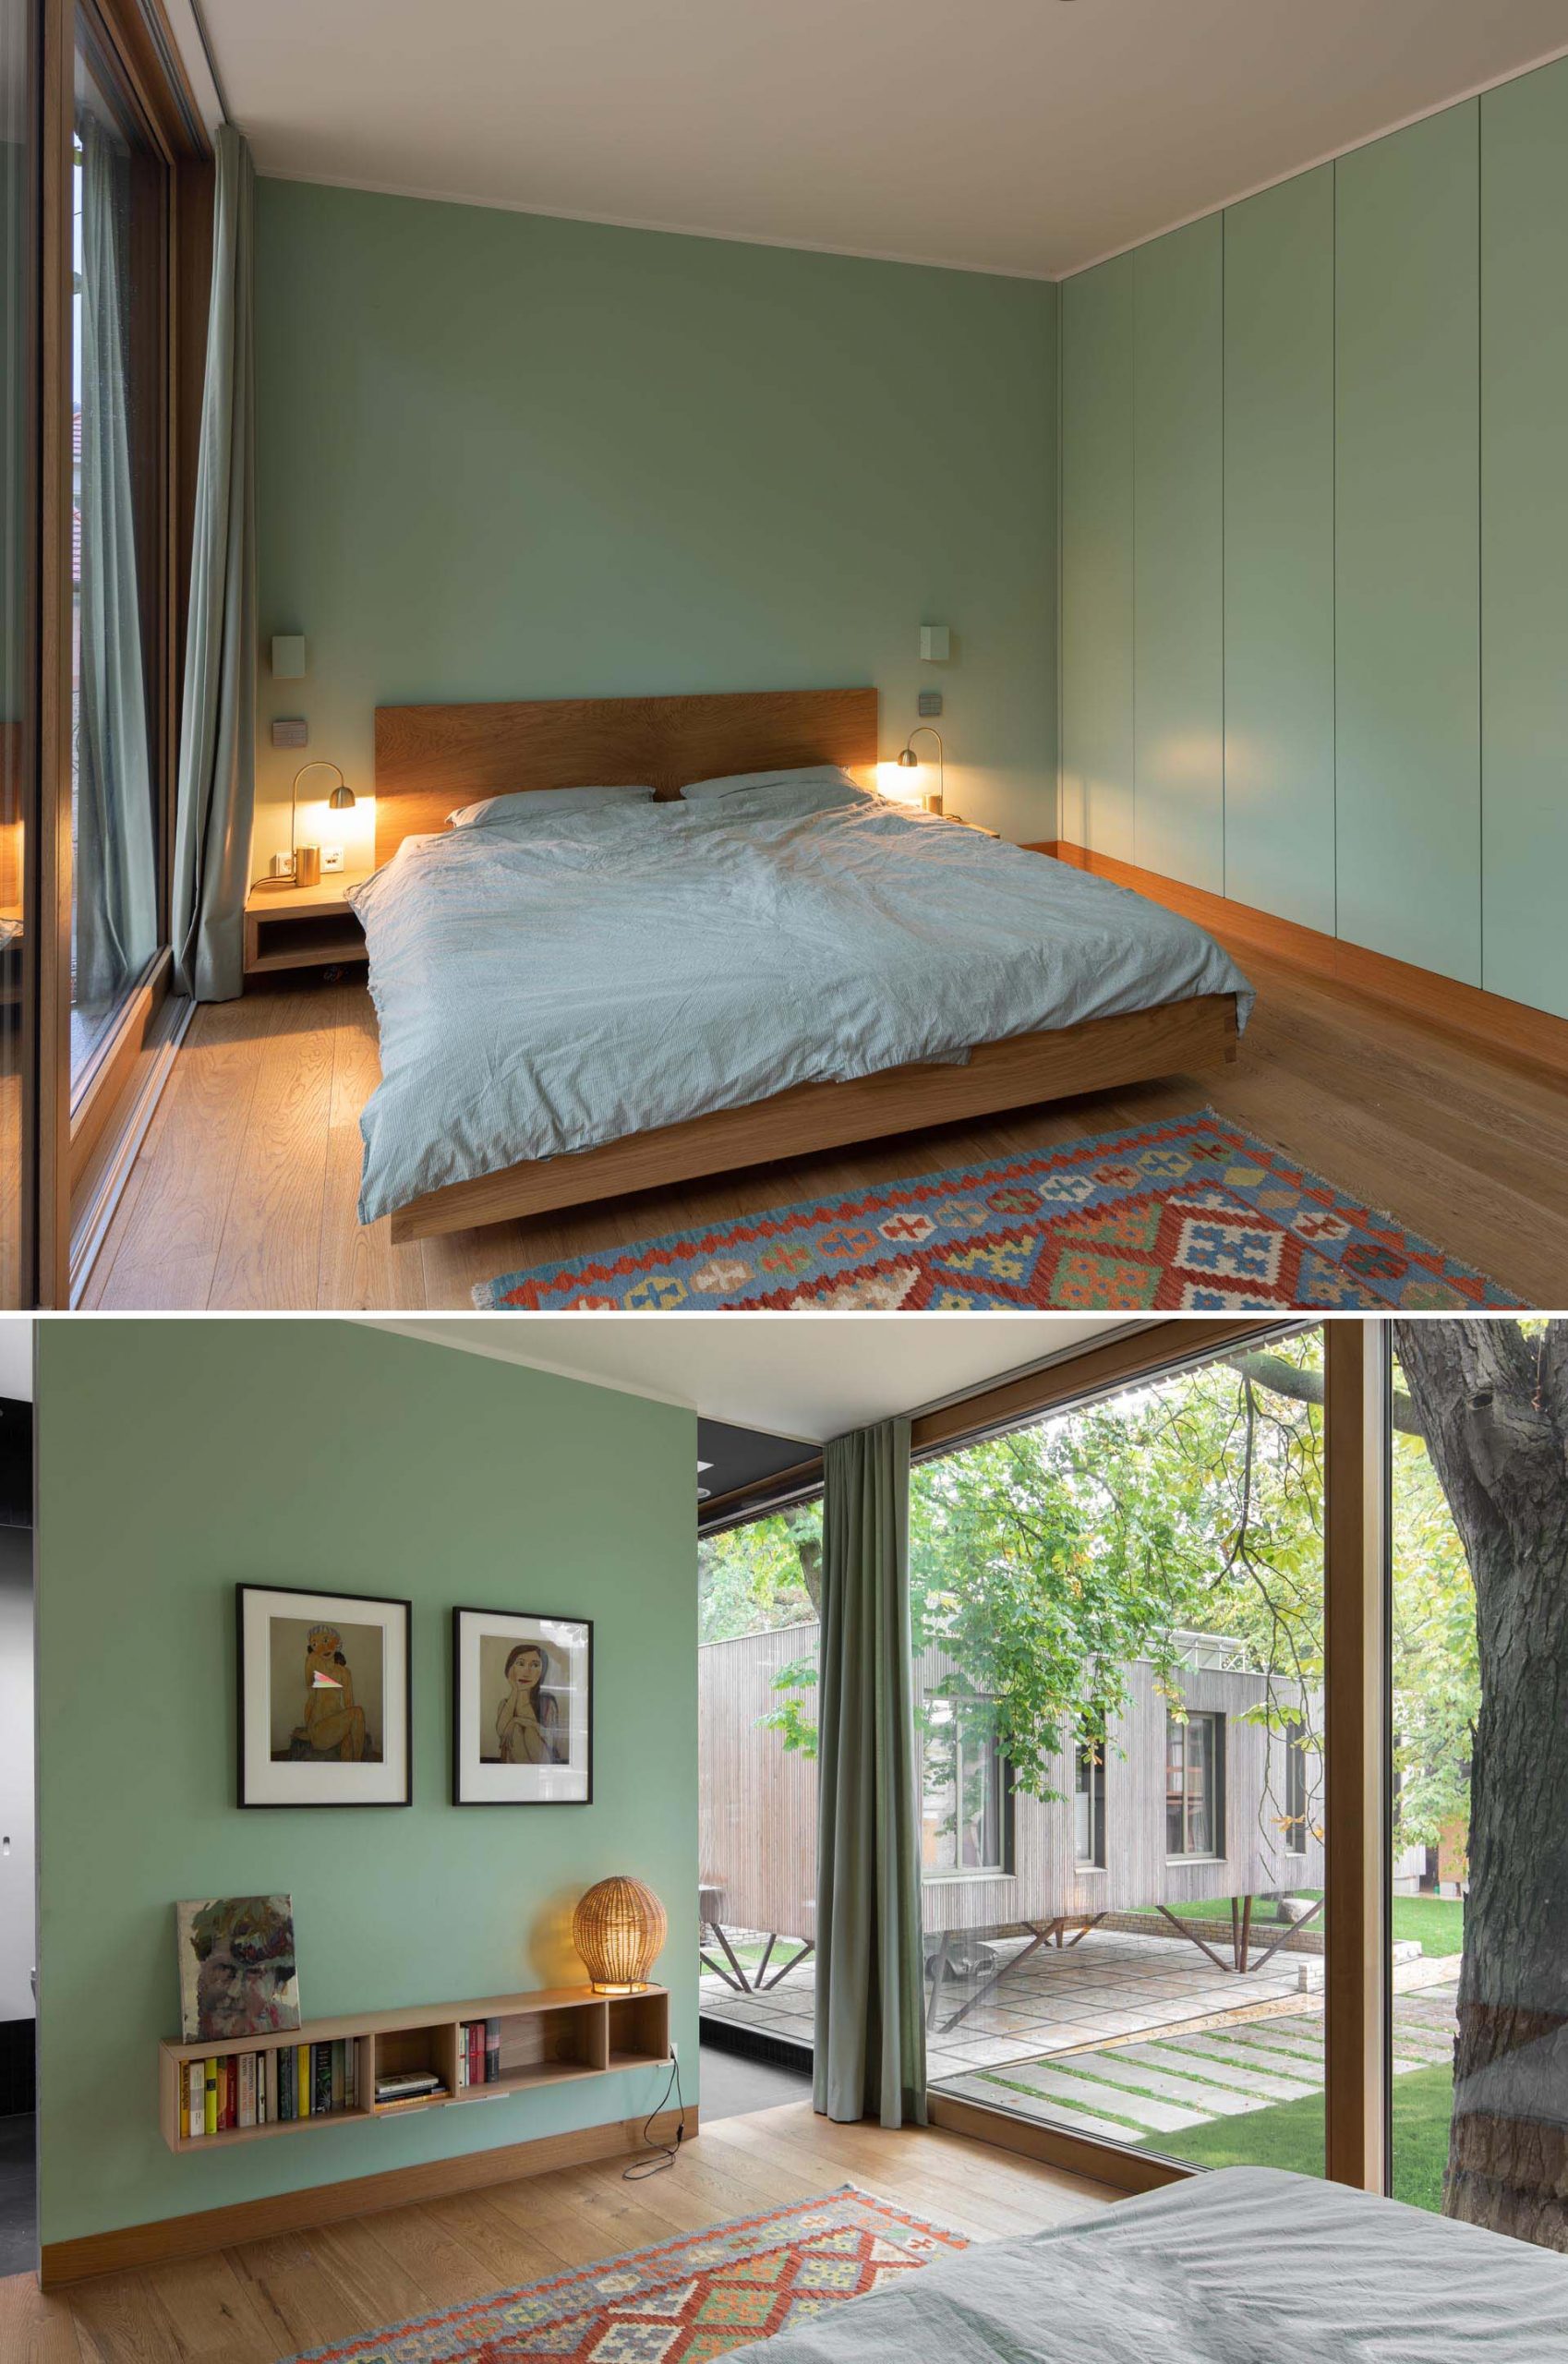 A modern bedroom with light green walls, wood flooring, and wood bed frame.